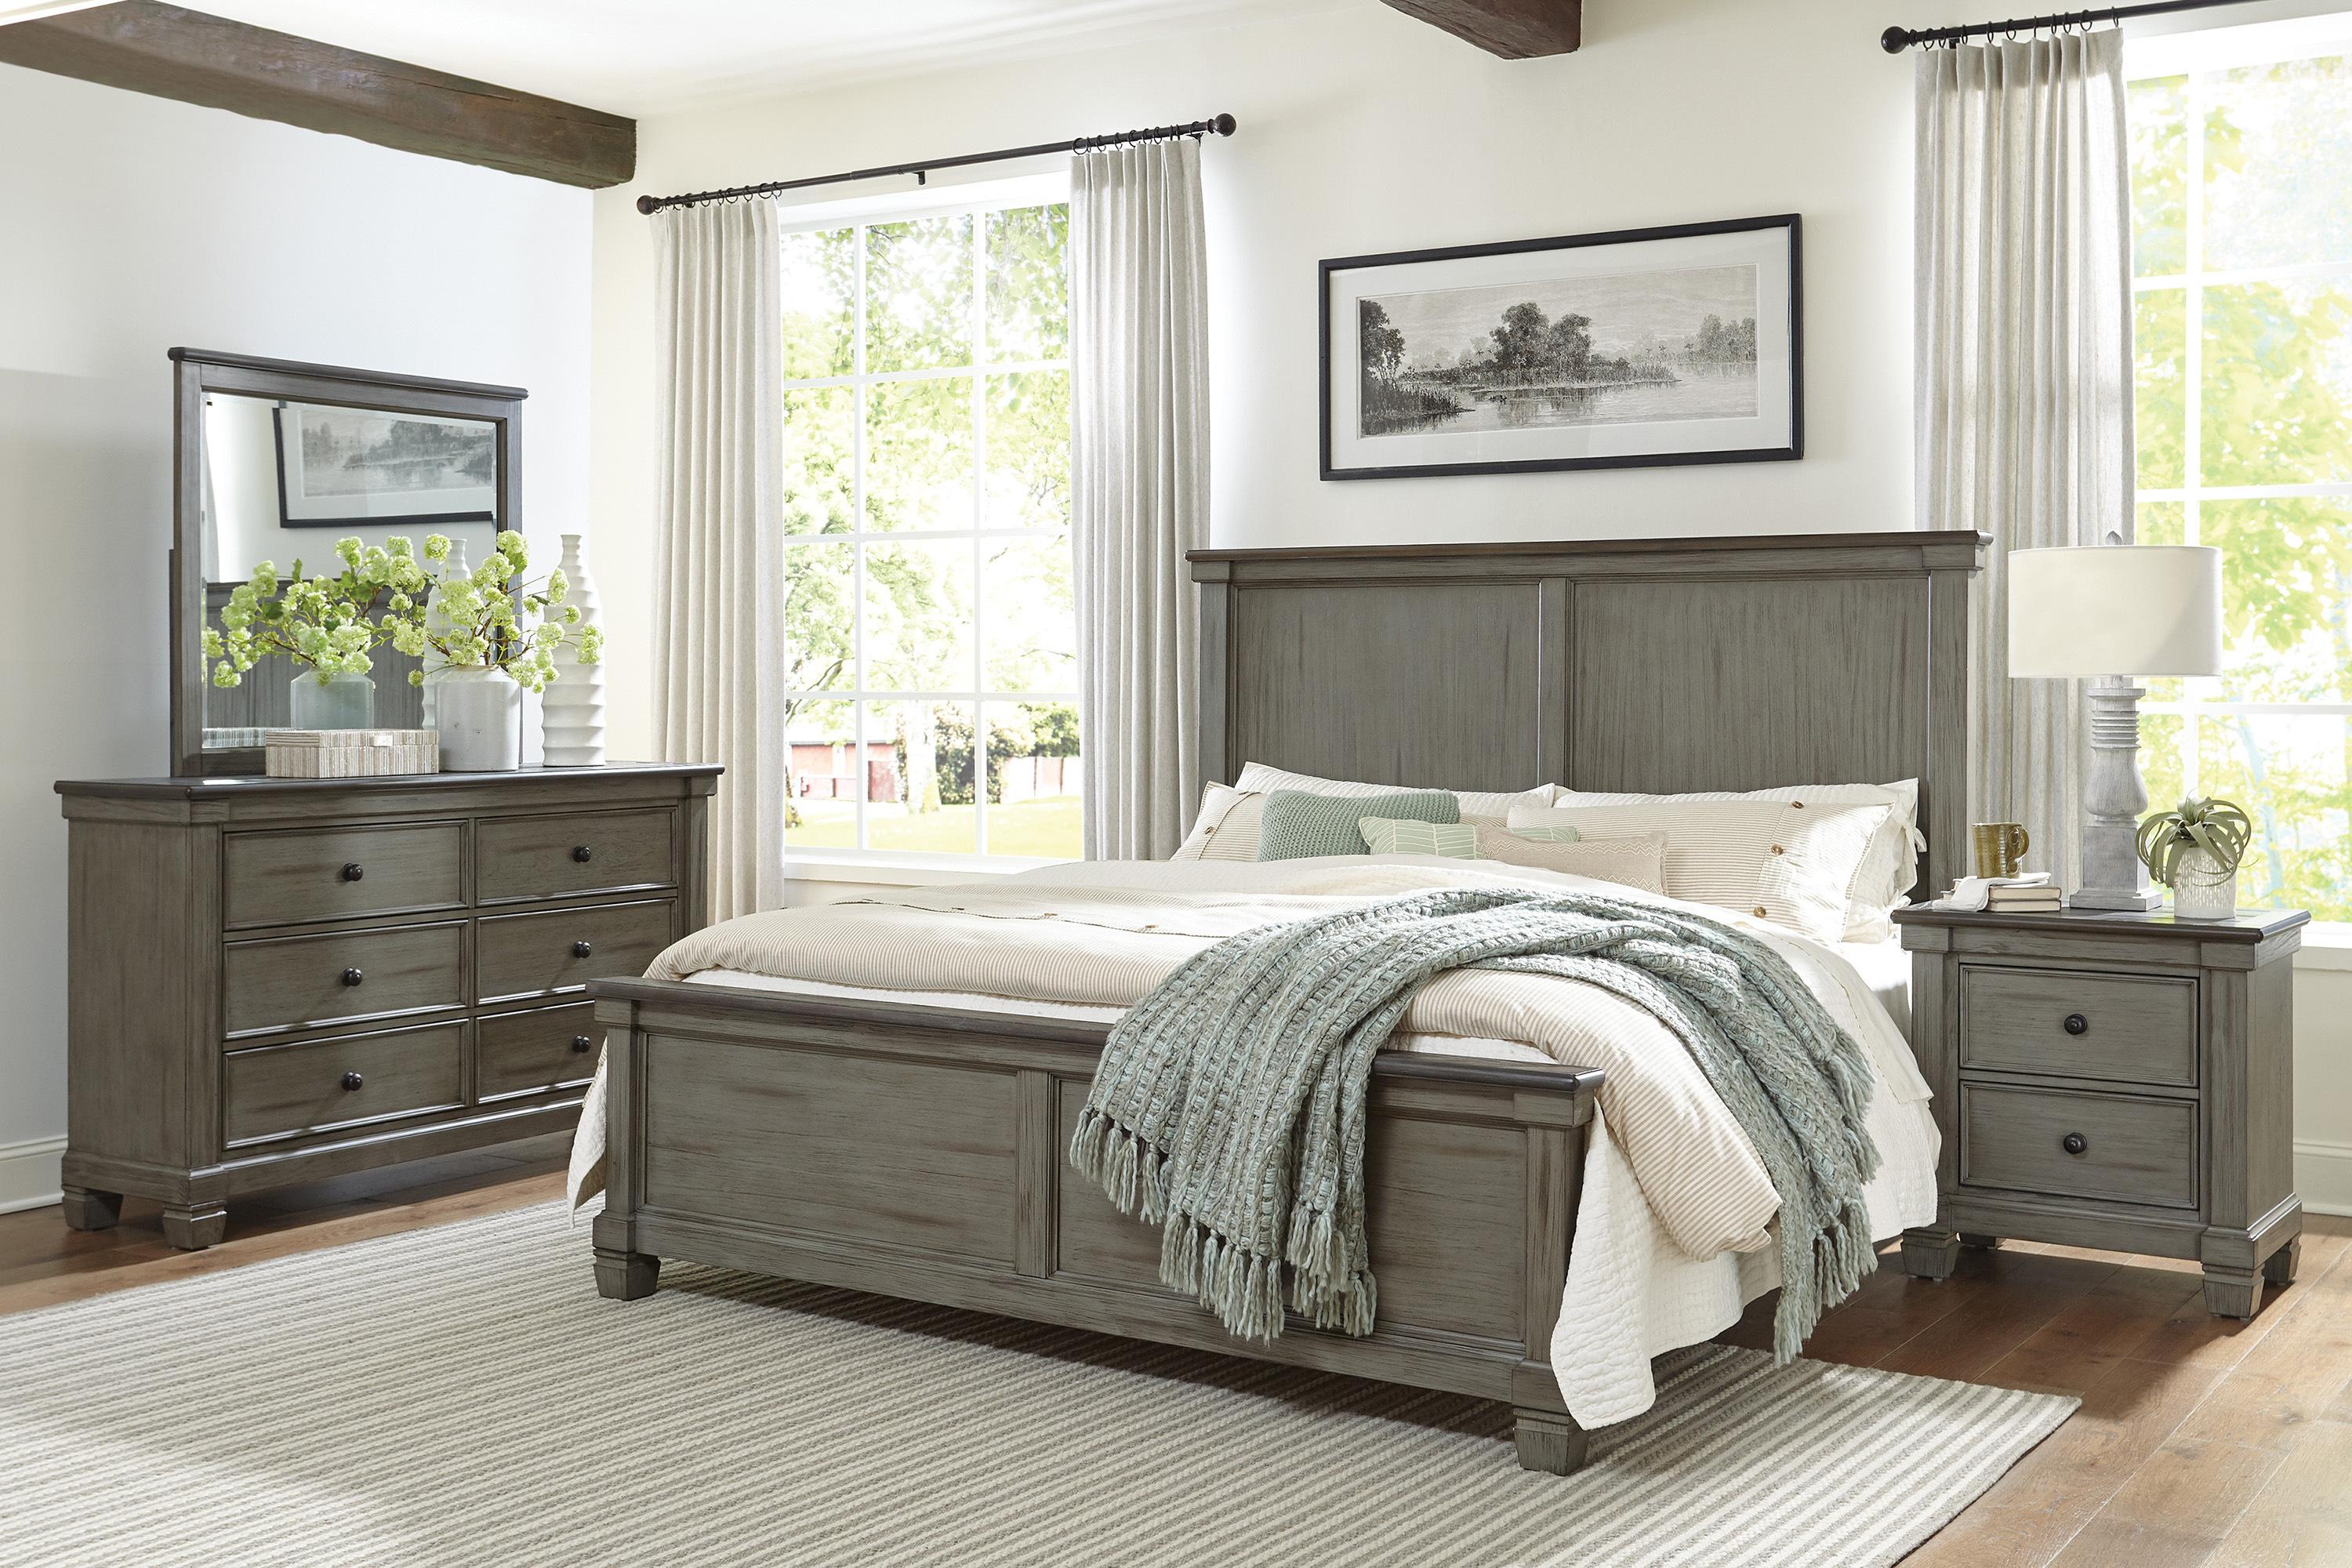 

    
Transitional Antique Gray & Coffee Wood Queen Bedroom Set 6pcs Homelegance 1626GY-1* Weaver
